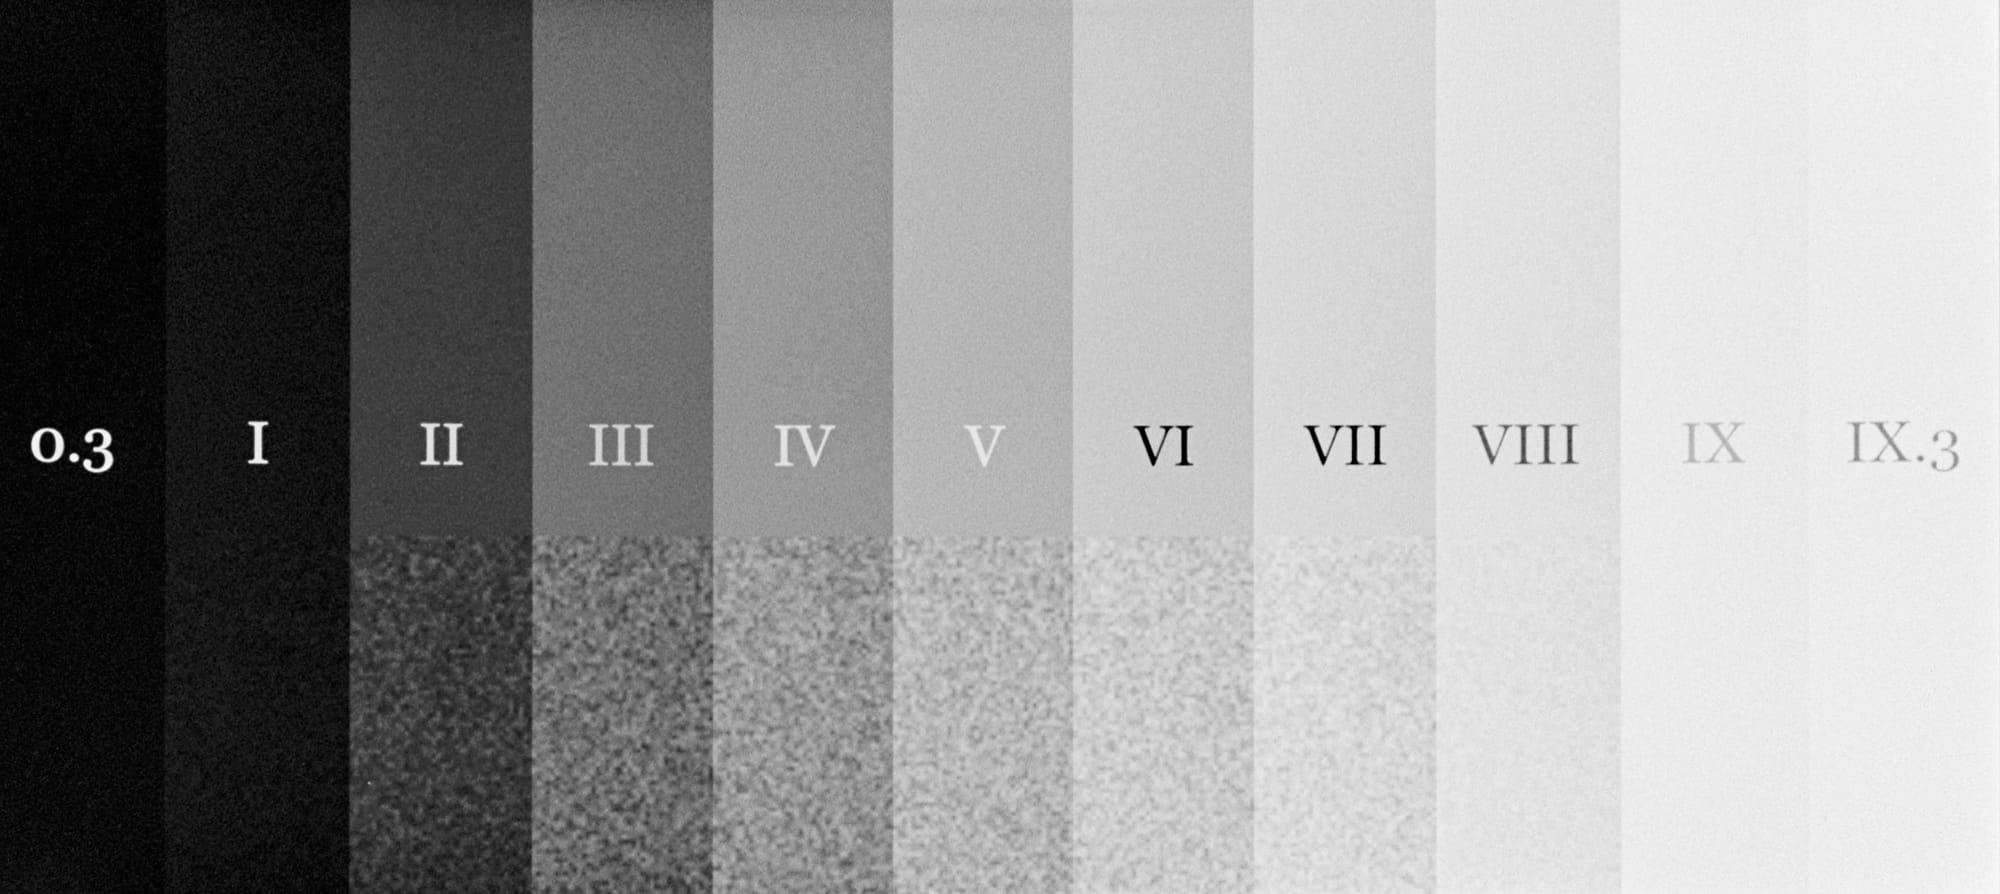 A New (and Experimental) Method for Evaluating Film